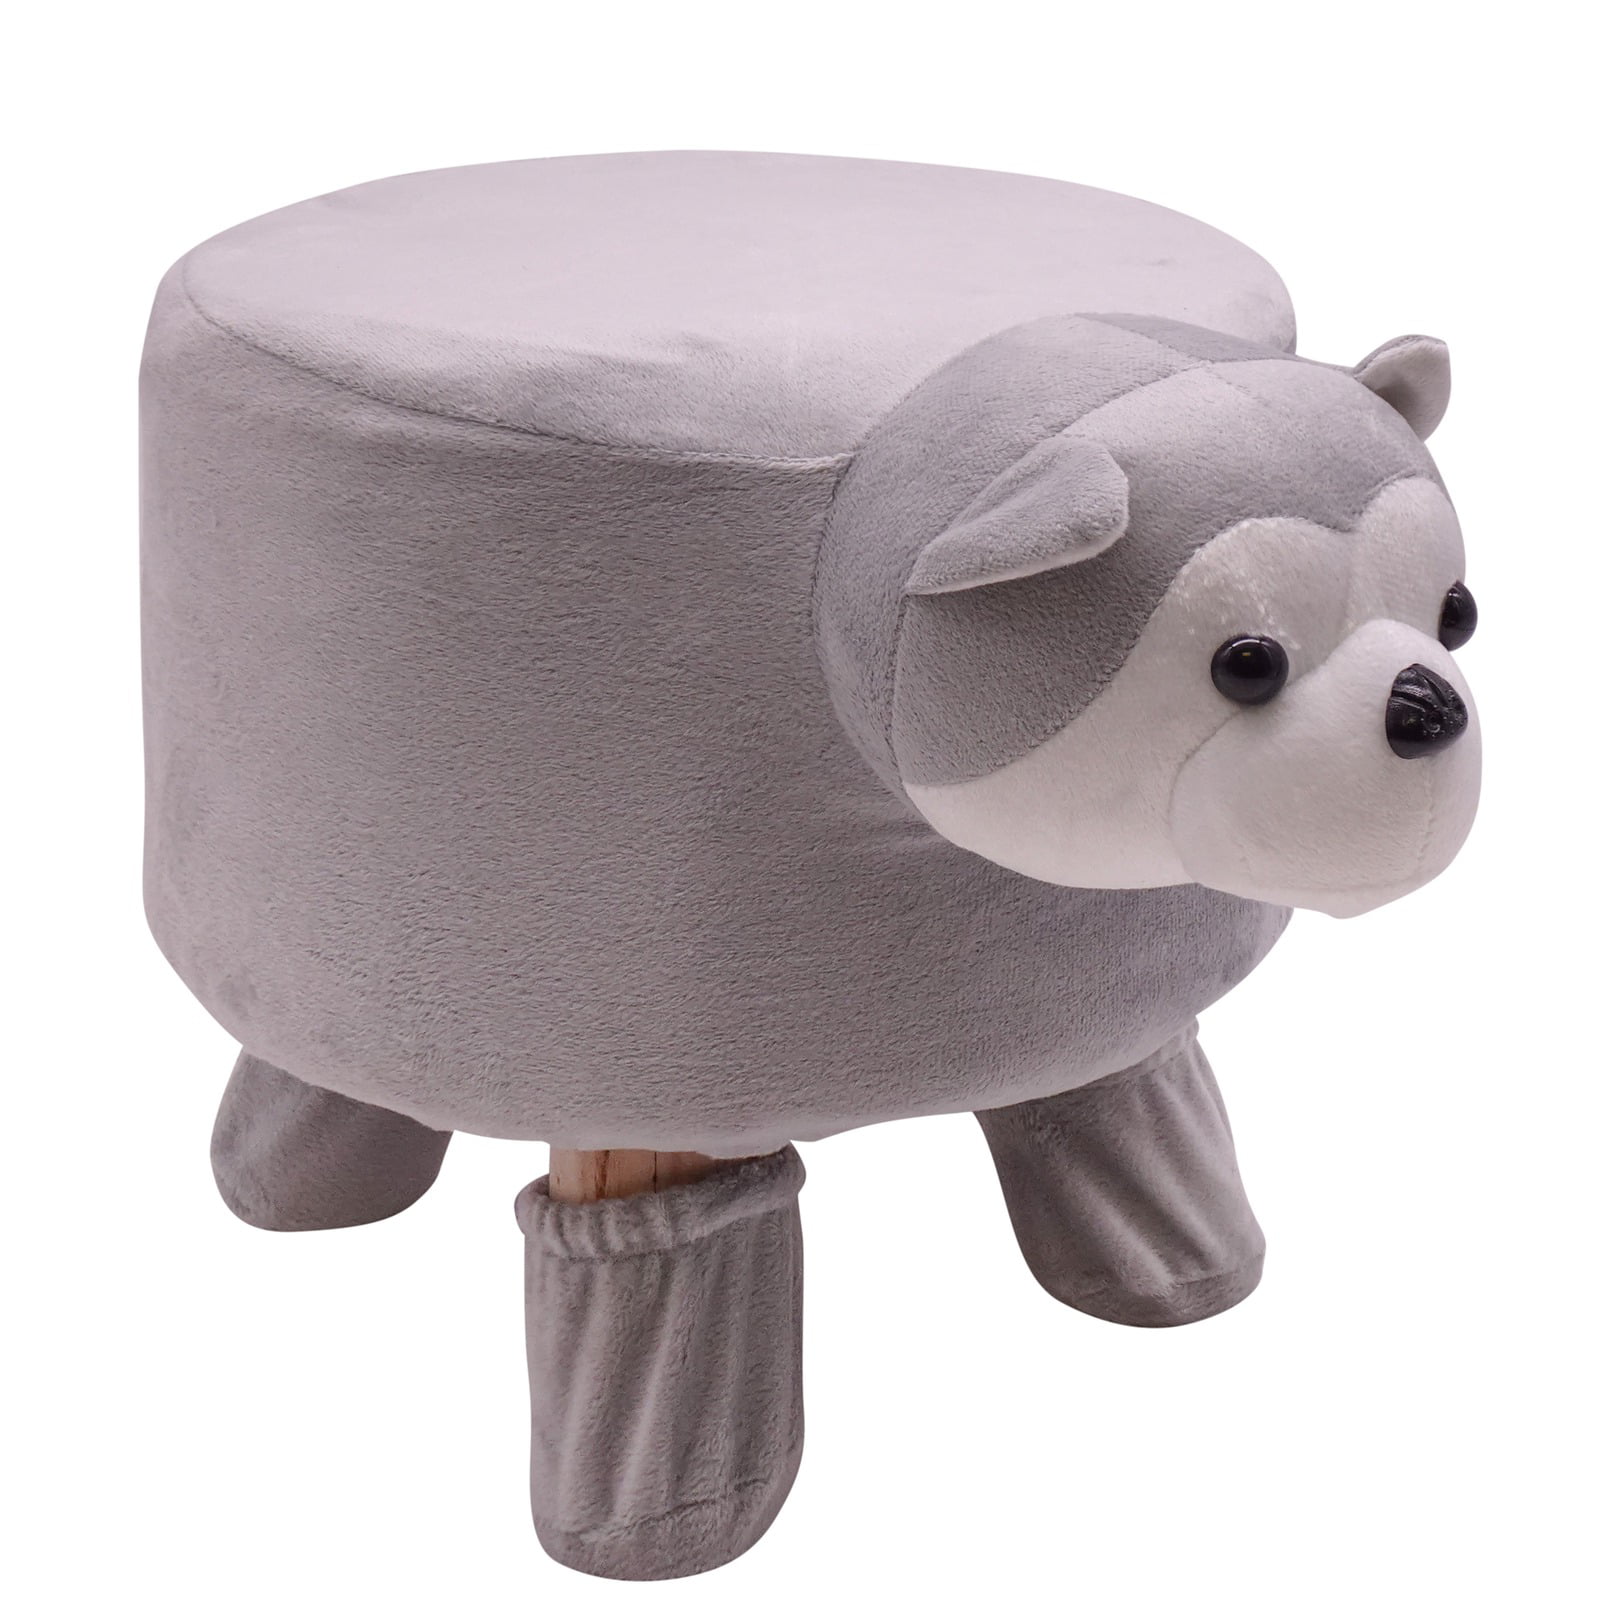 Adults Luxury Wooden Animal Padded Foot Stool Ottoman Pouf Bench For Kids,Teens 